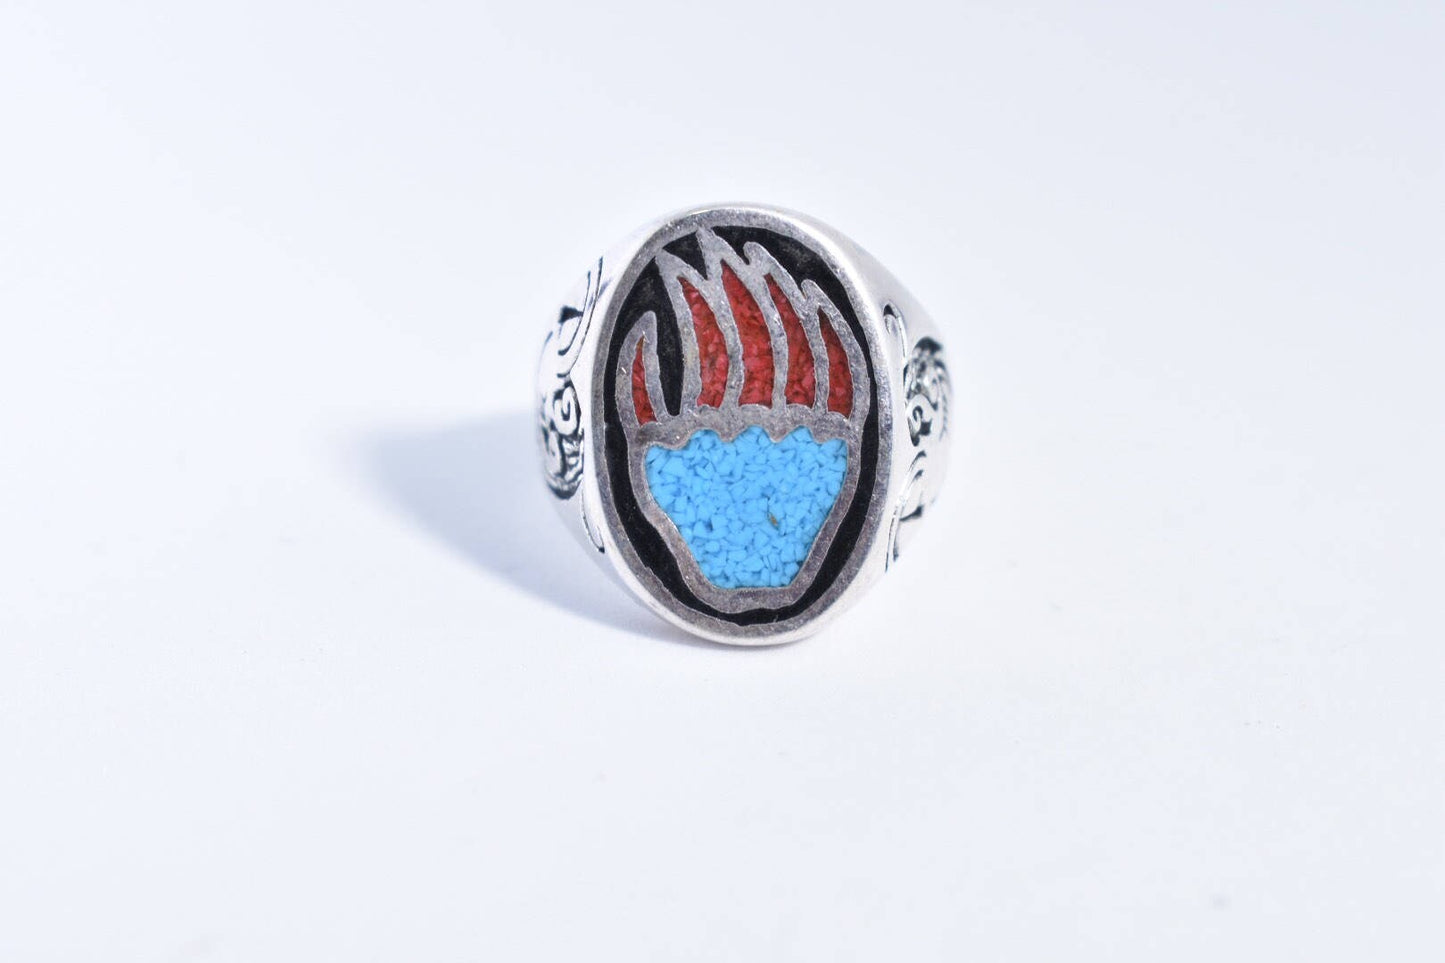 Vintage Native American Southwestern Style Turquoise Stone Inlay Mens Bear Paw Ring